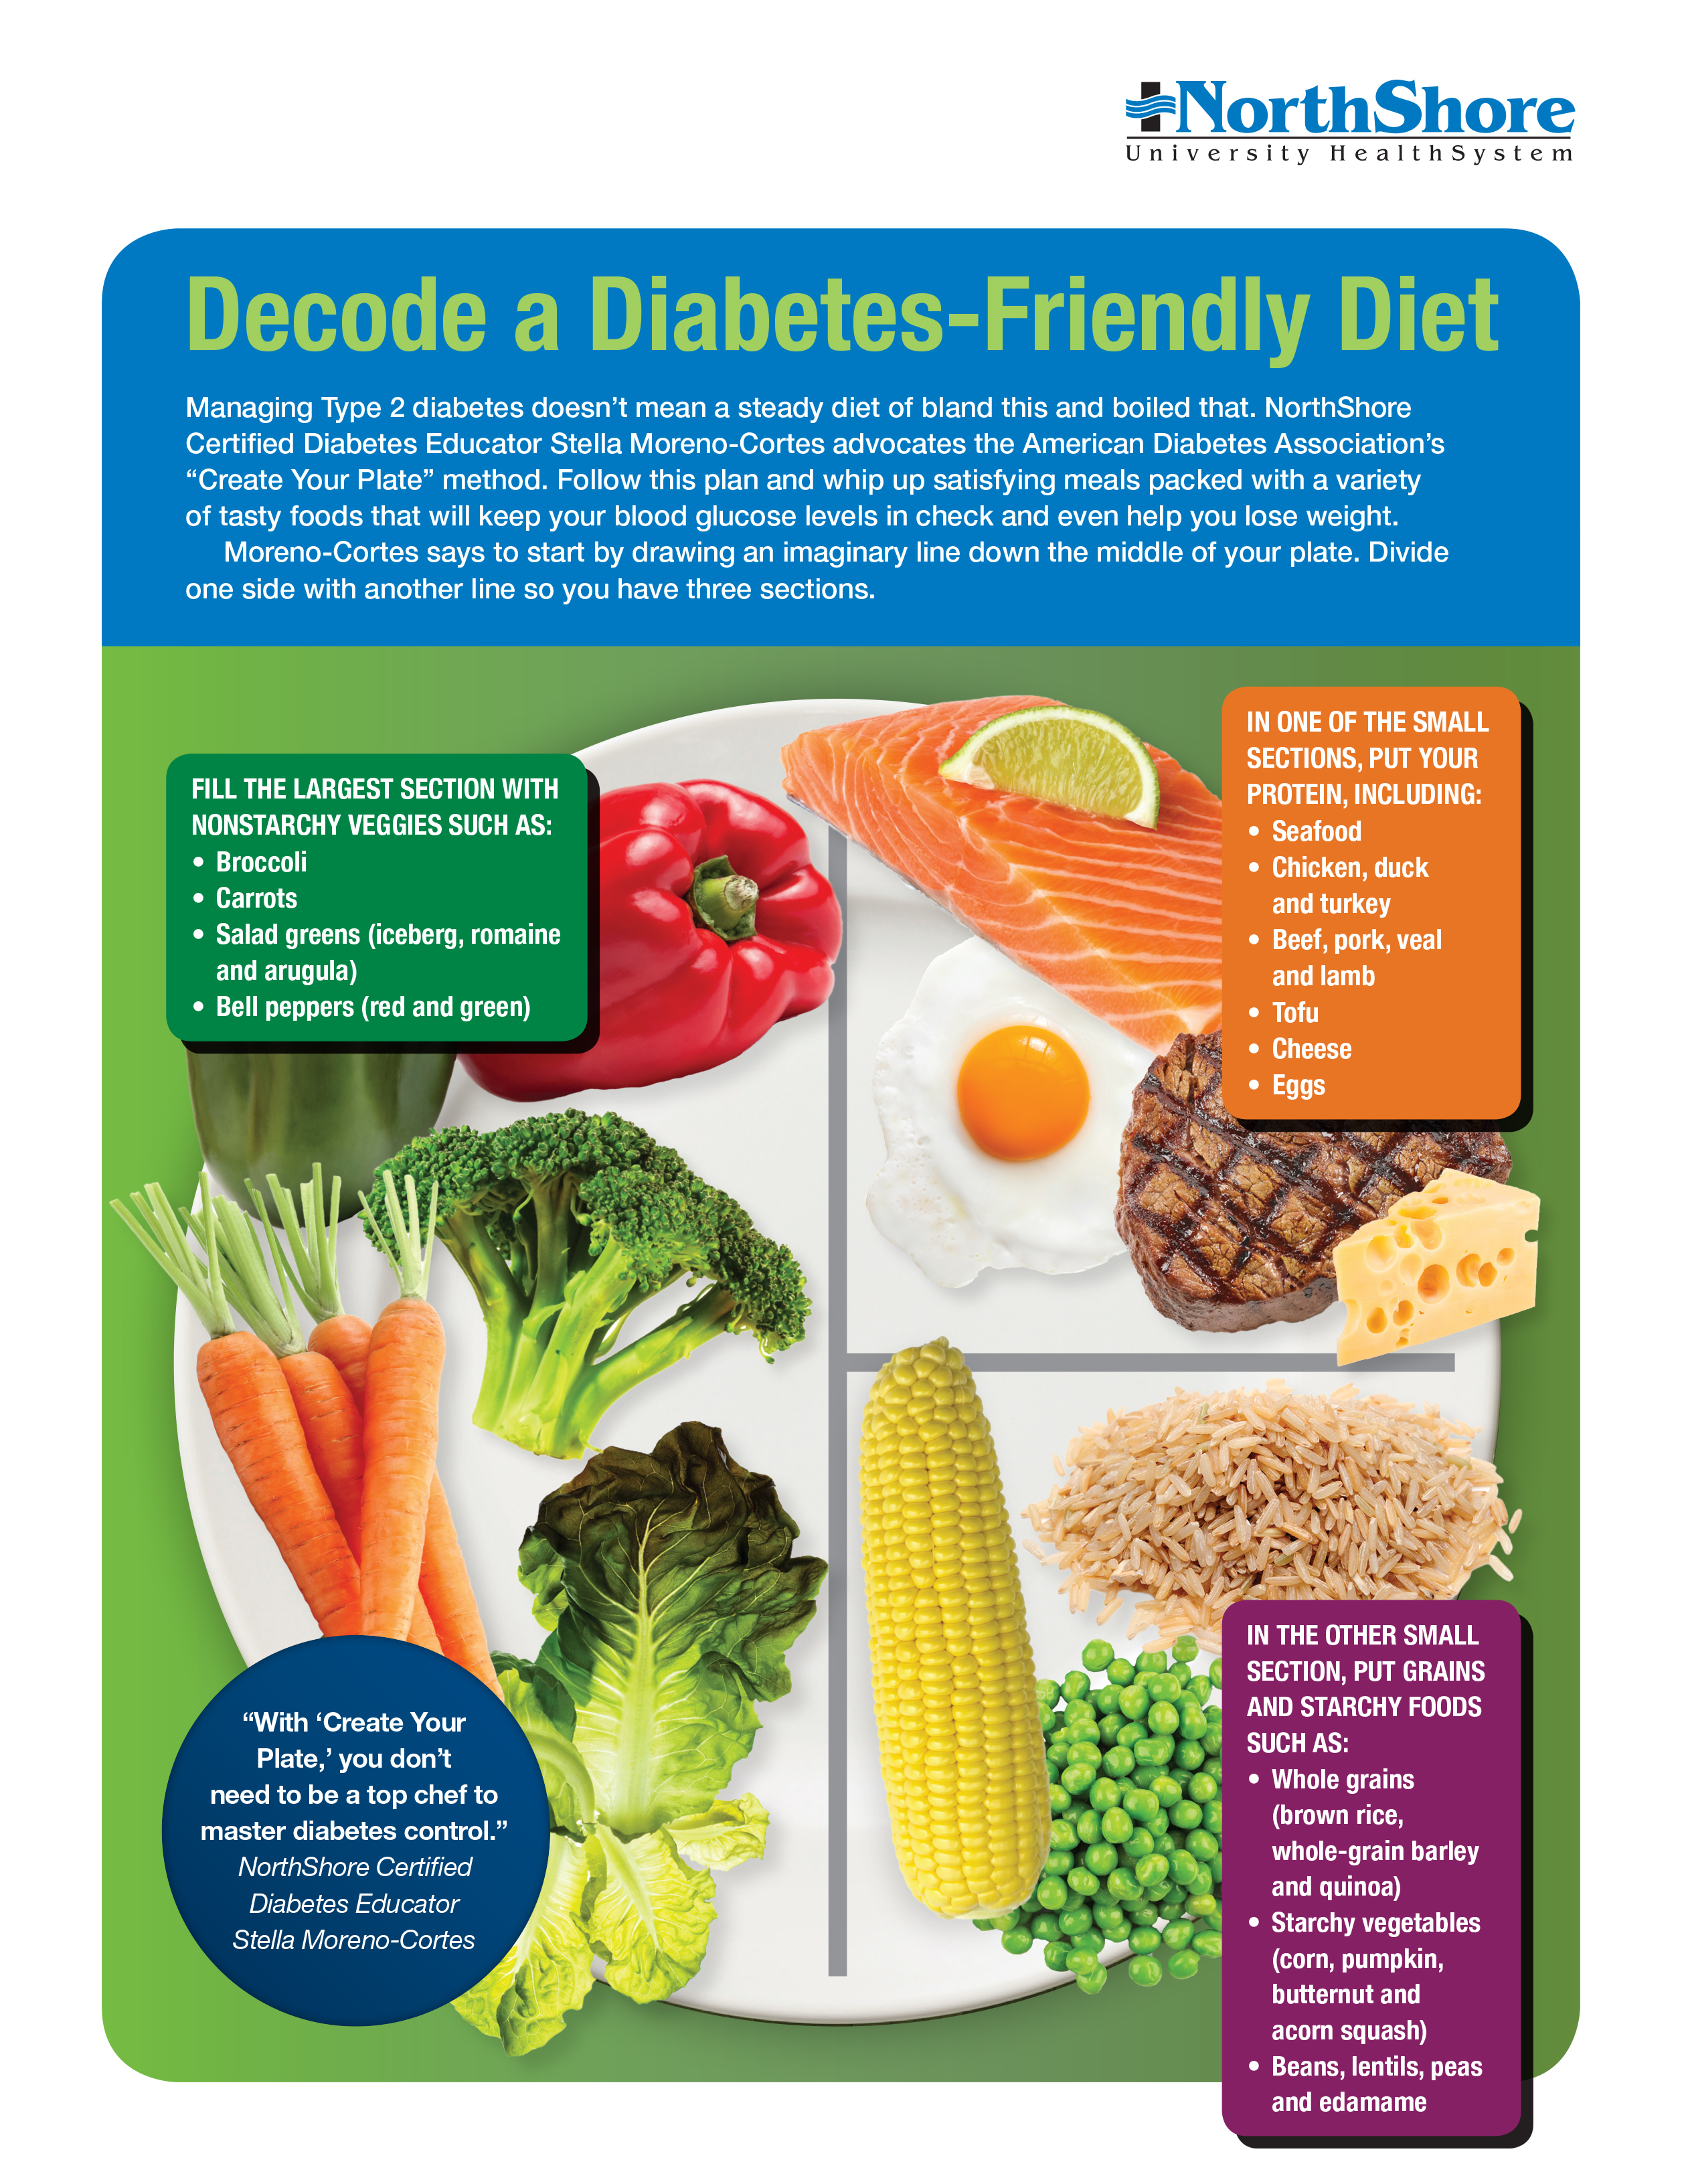 Dietary modifications for diabetes